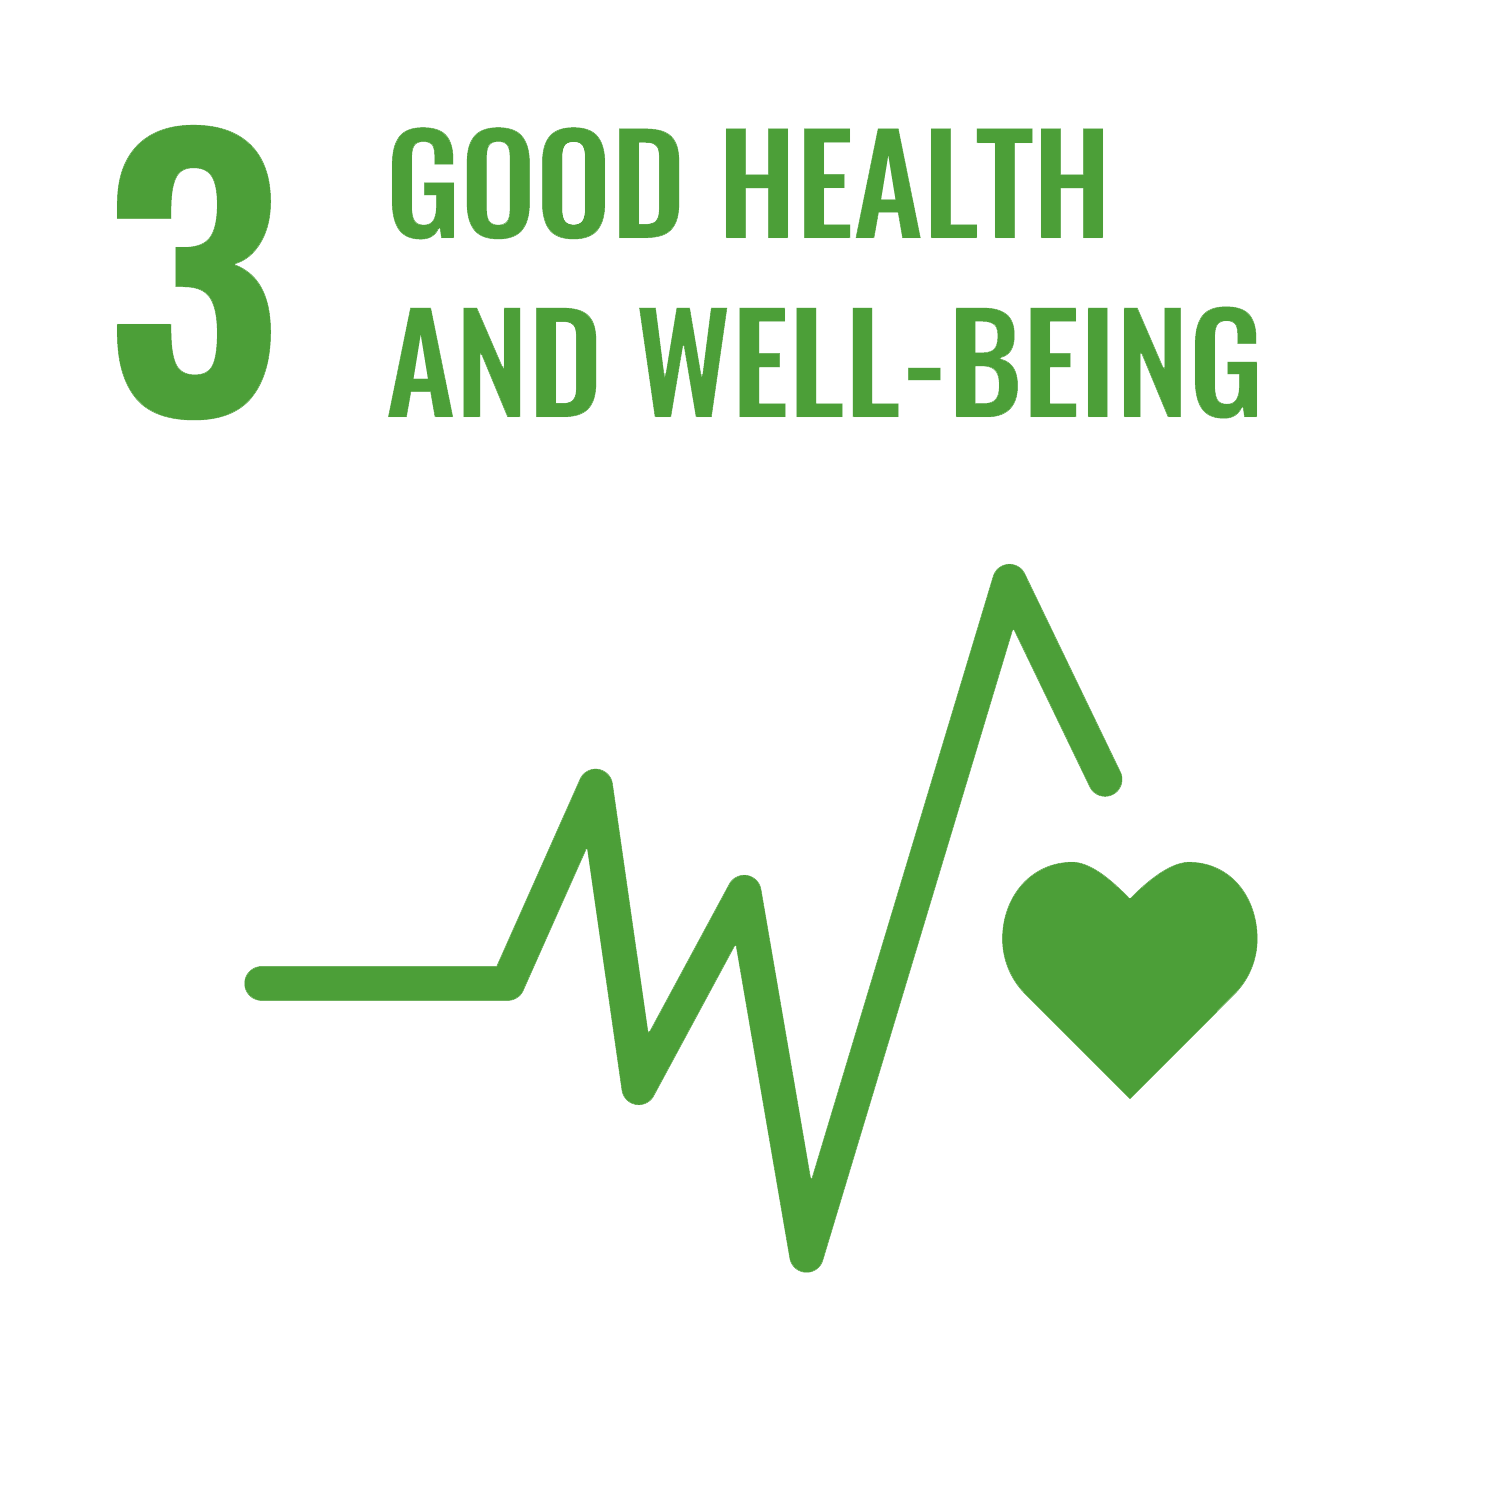 United Nations Goal #3 Good Health and Well-Being